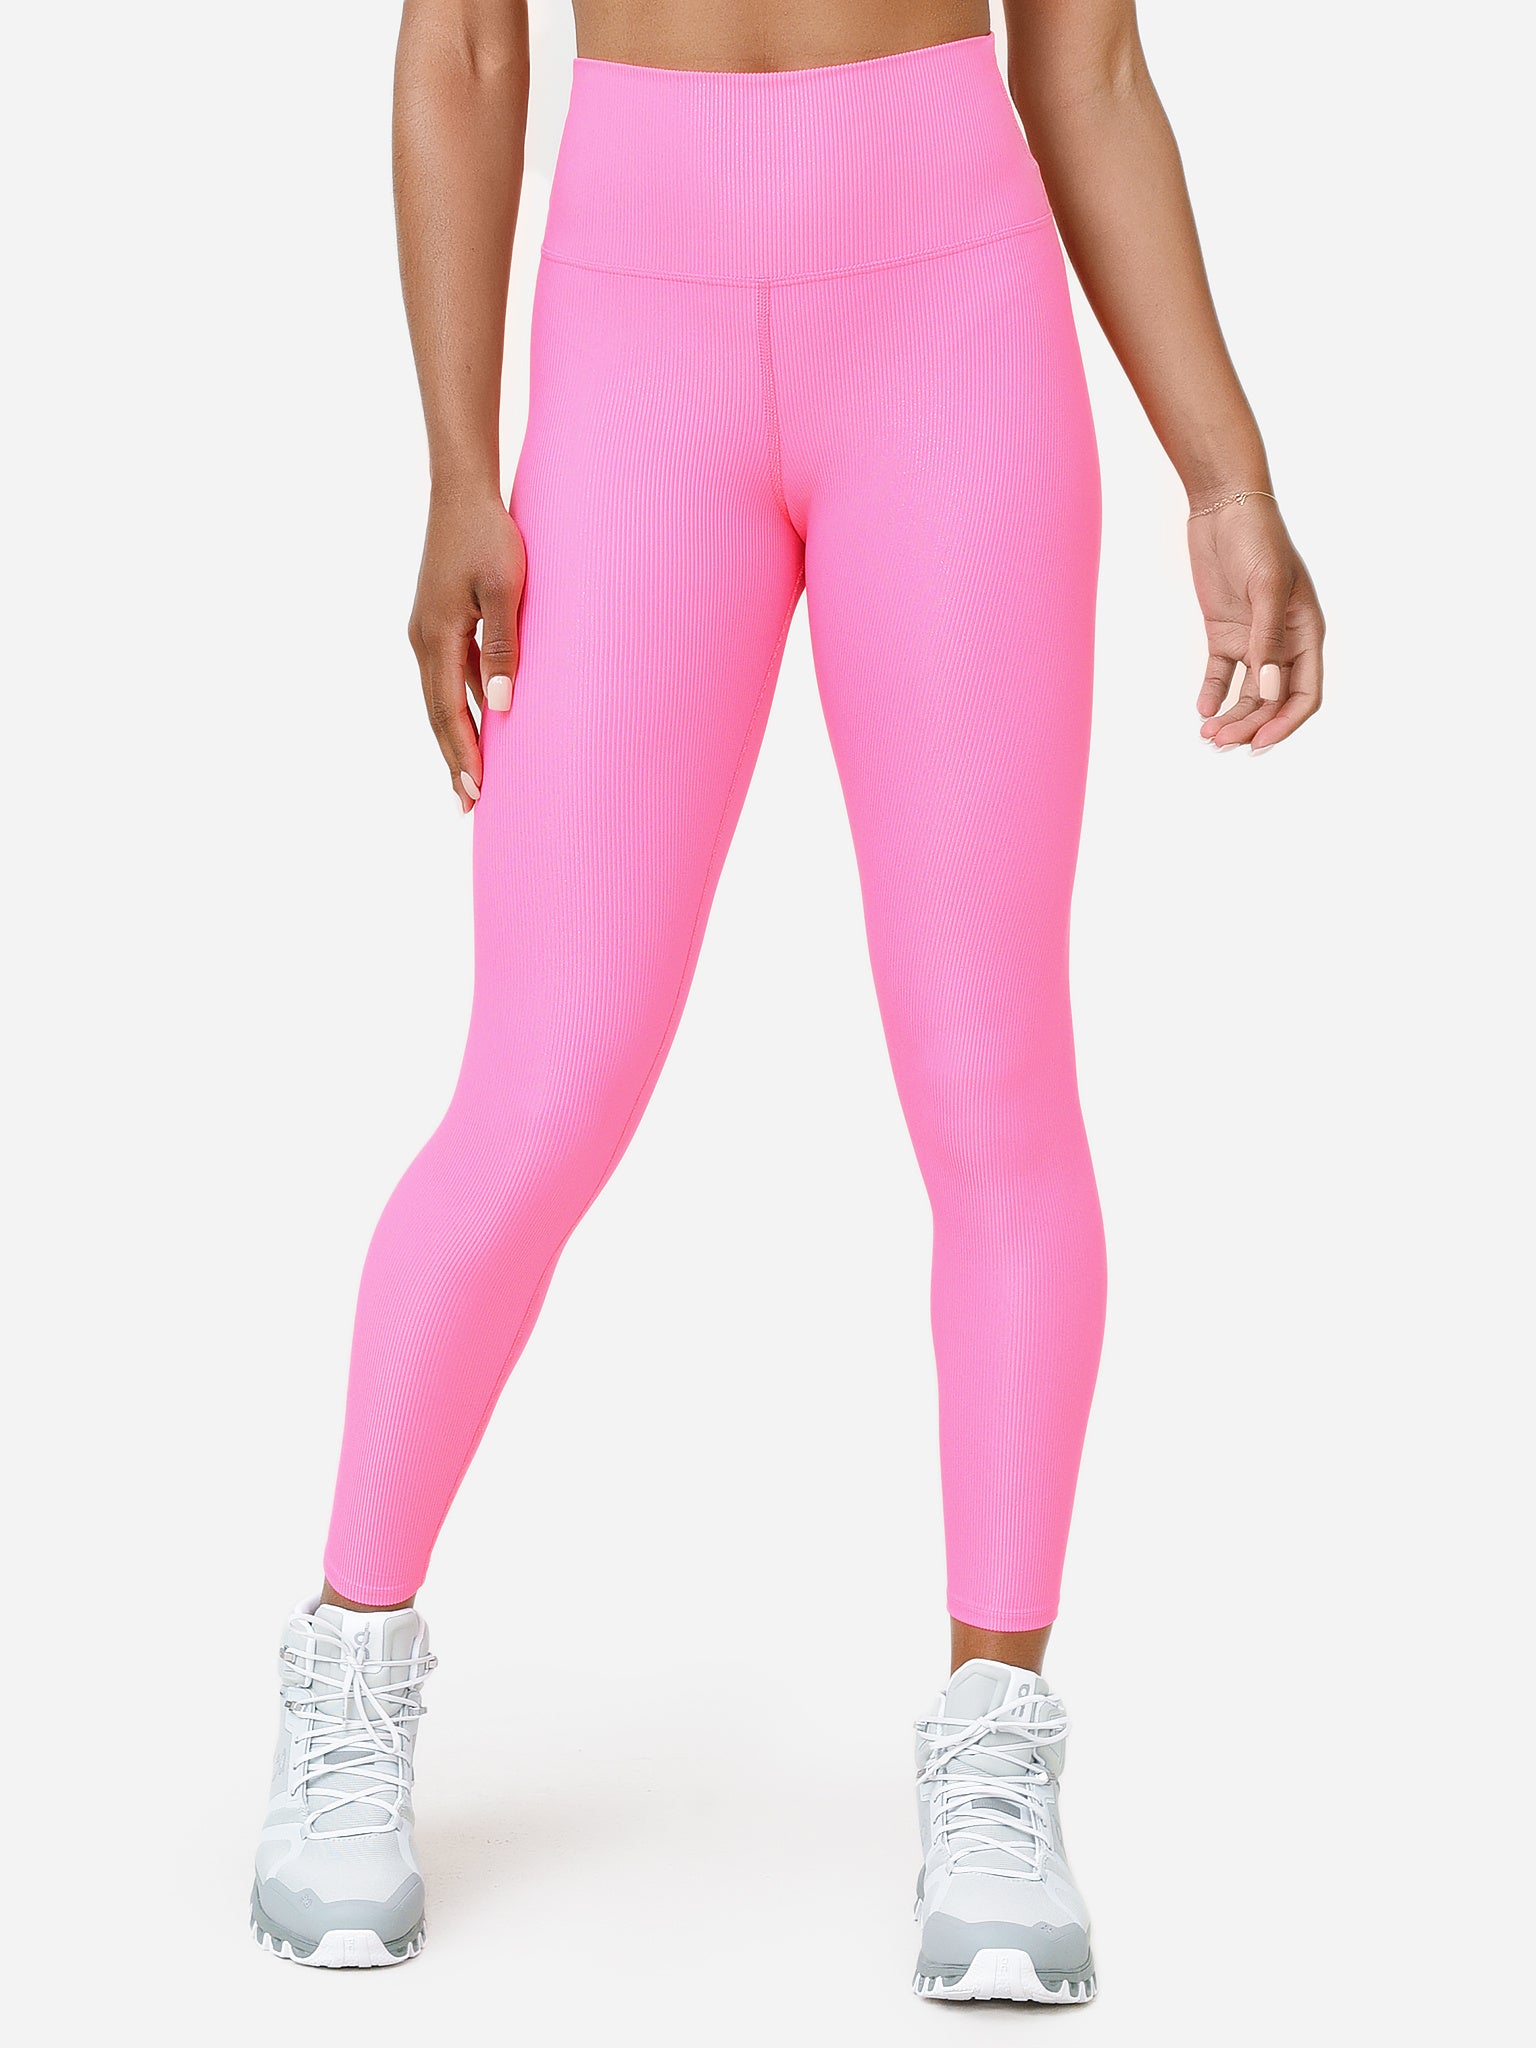 Beach Riot Ayla Legging Pink  Pink leggings, Athleisure outfits, Beach riot